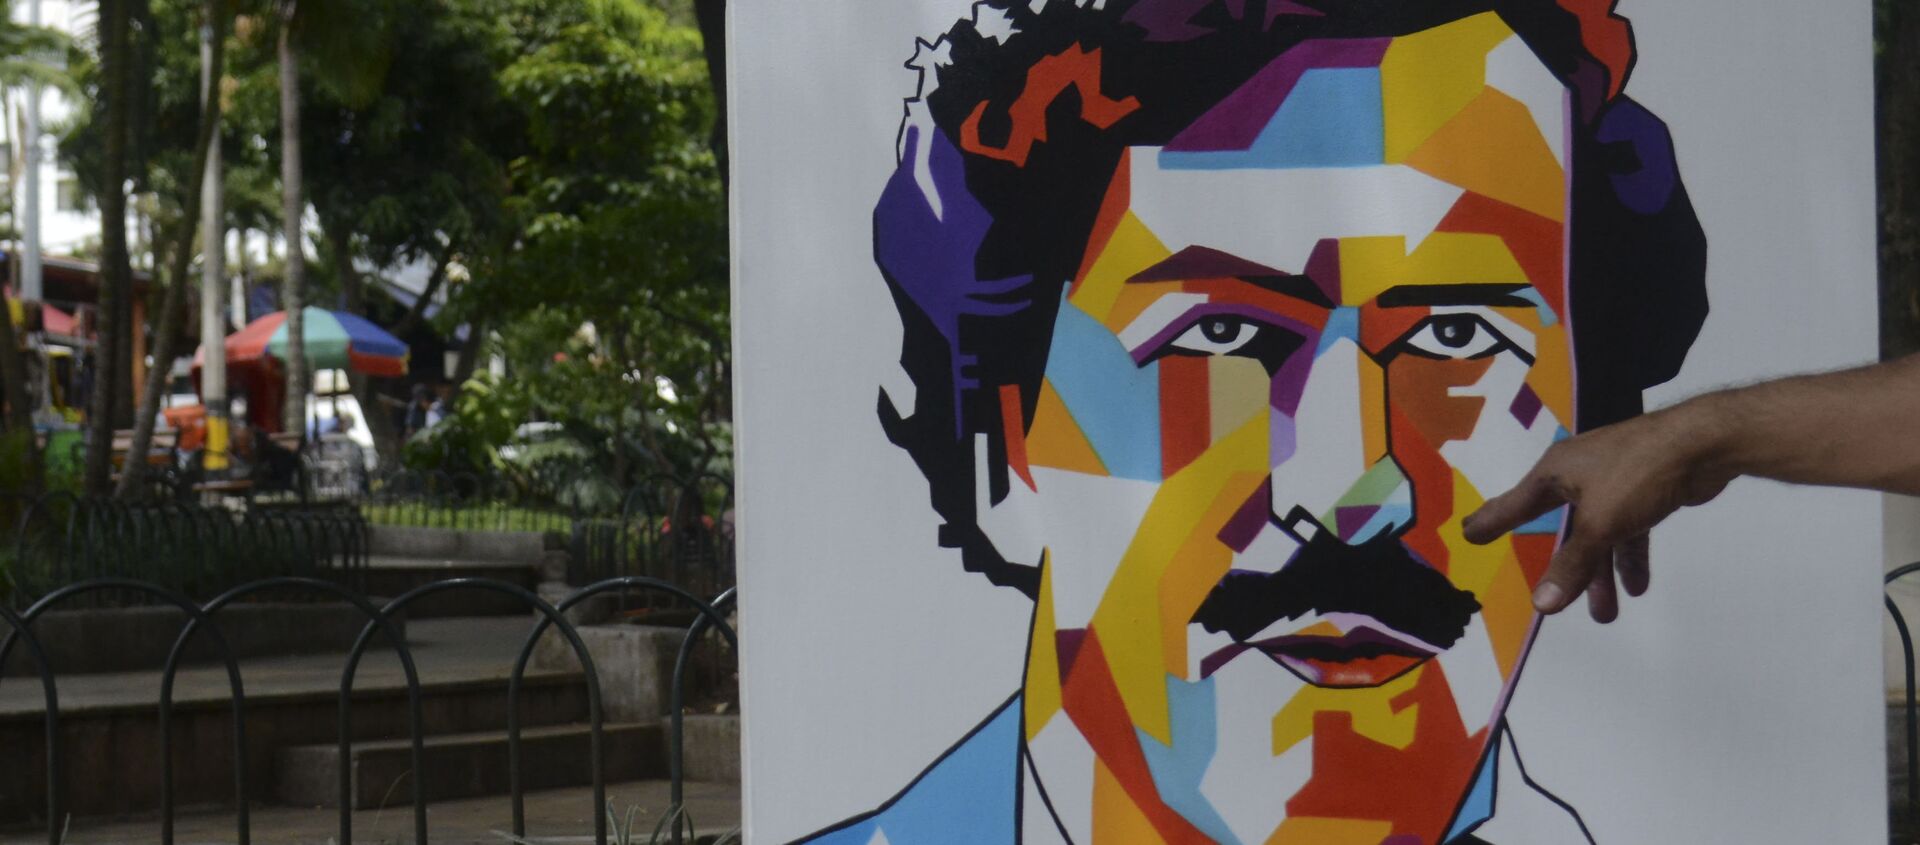 Paintings depicting late Colombian drug lord Pablo Escobar are on display at Lleras Park in Medellin - Sputnik Mundo, 1920, 24.09.2020